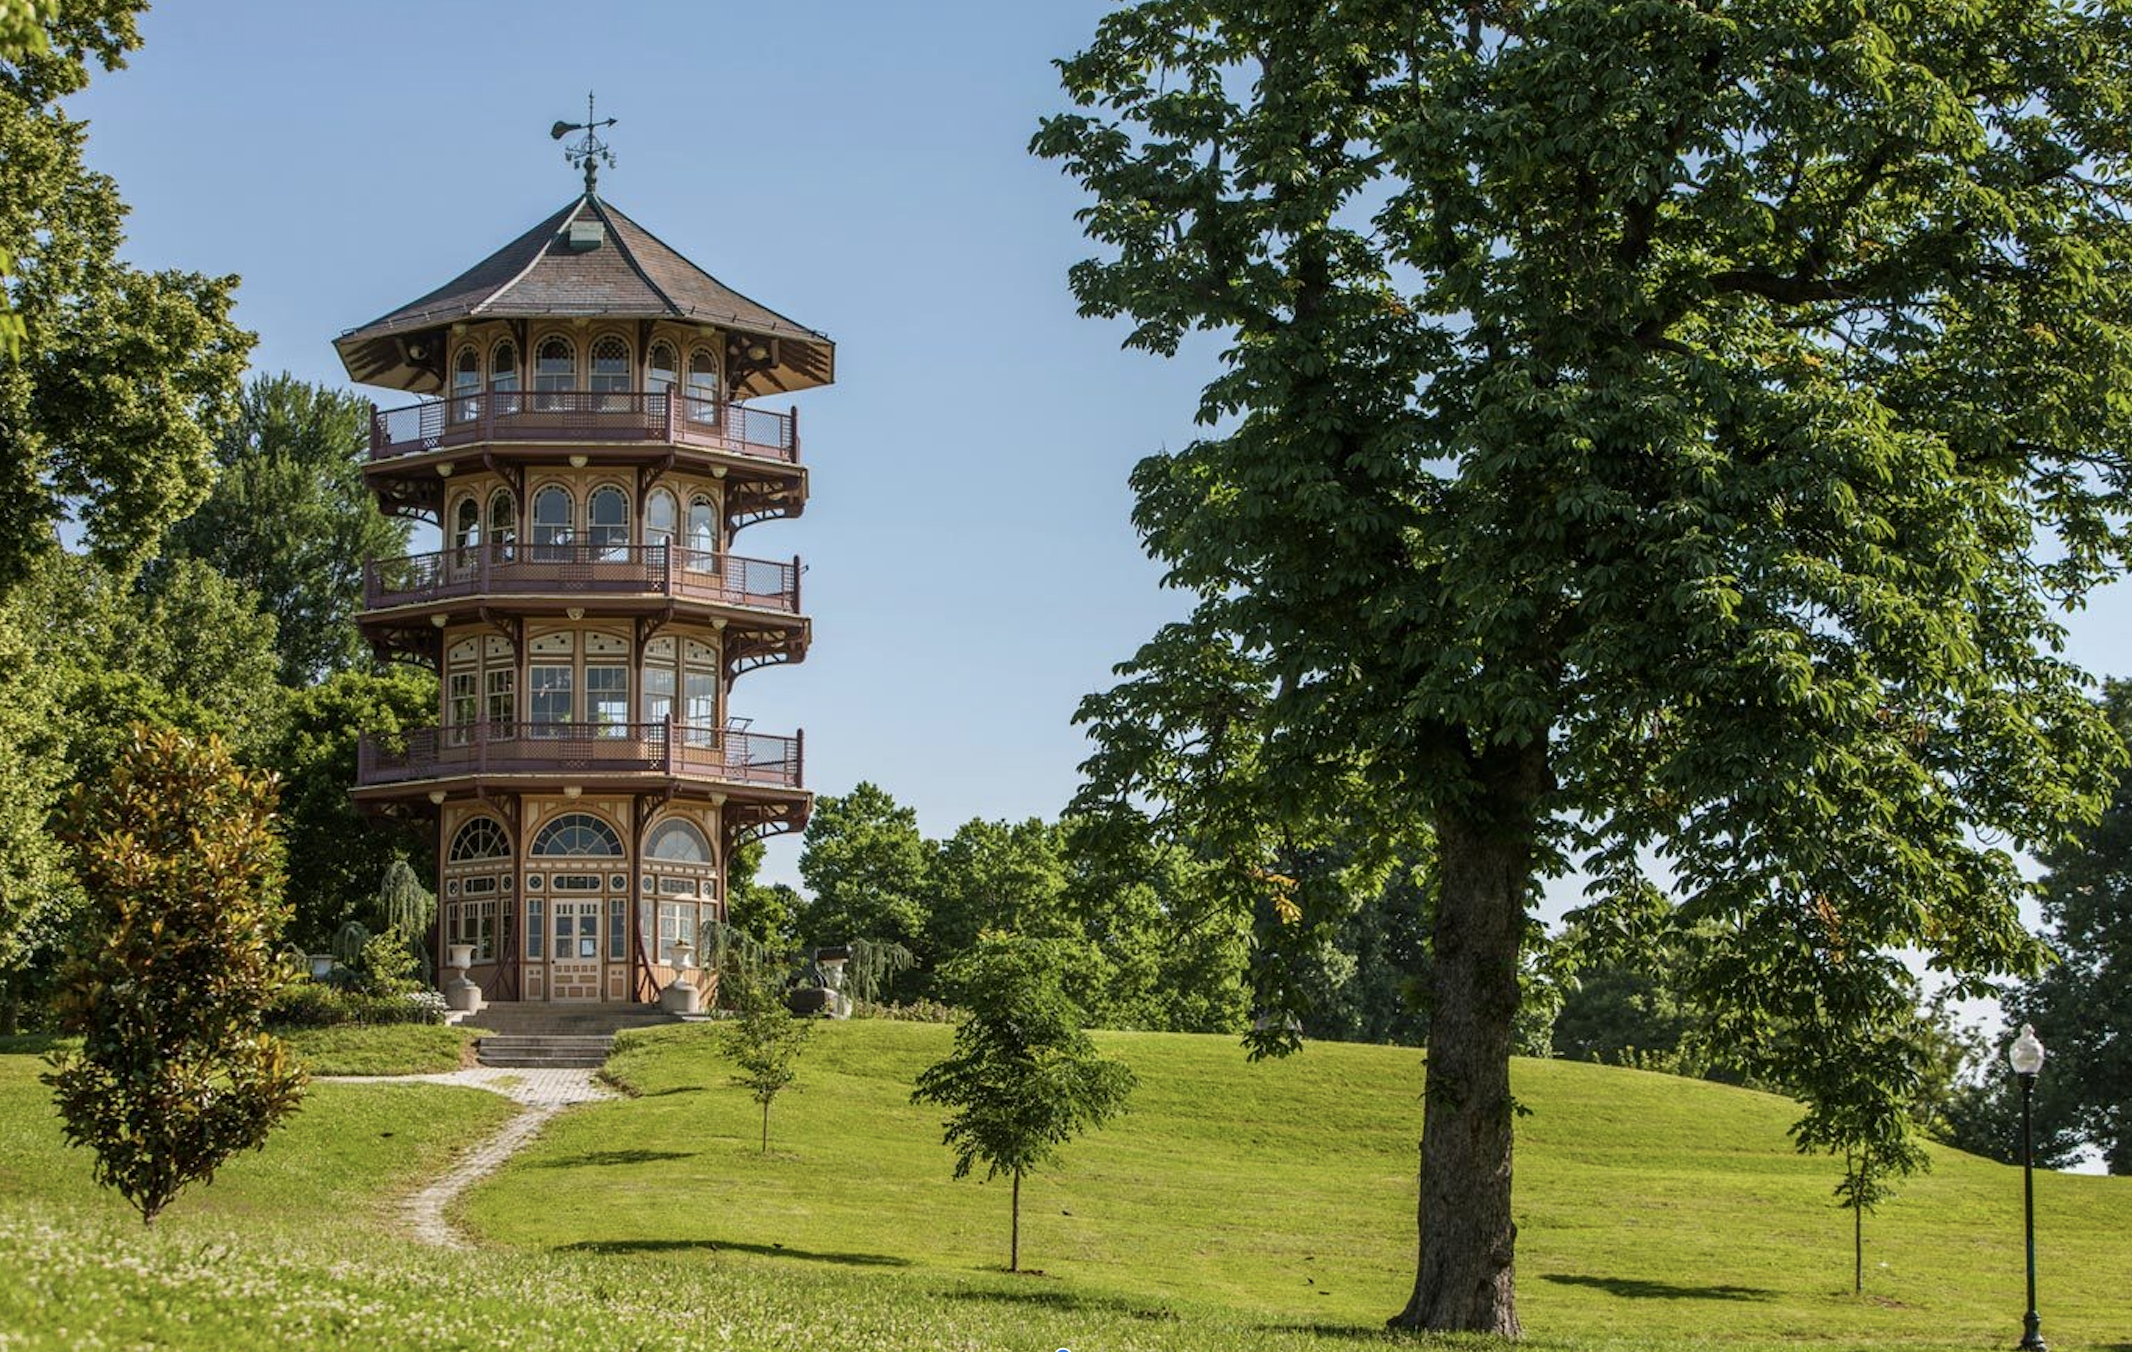 The pagoda at Baltimore's Patterson Park